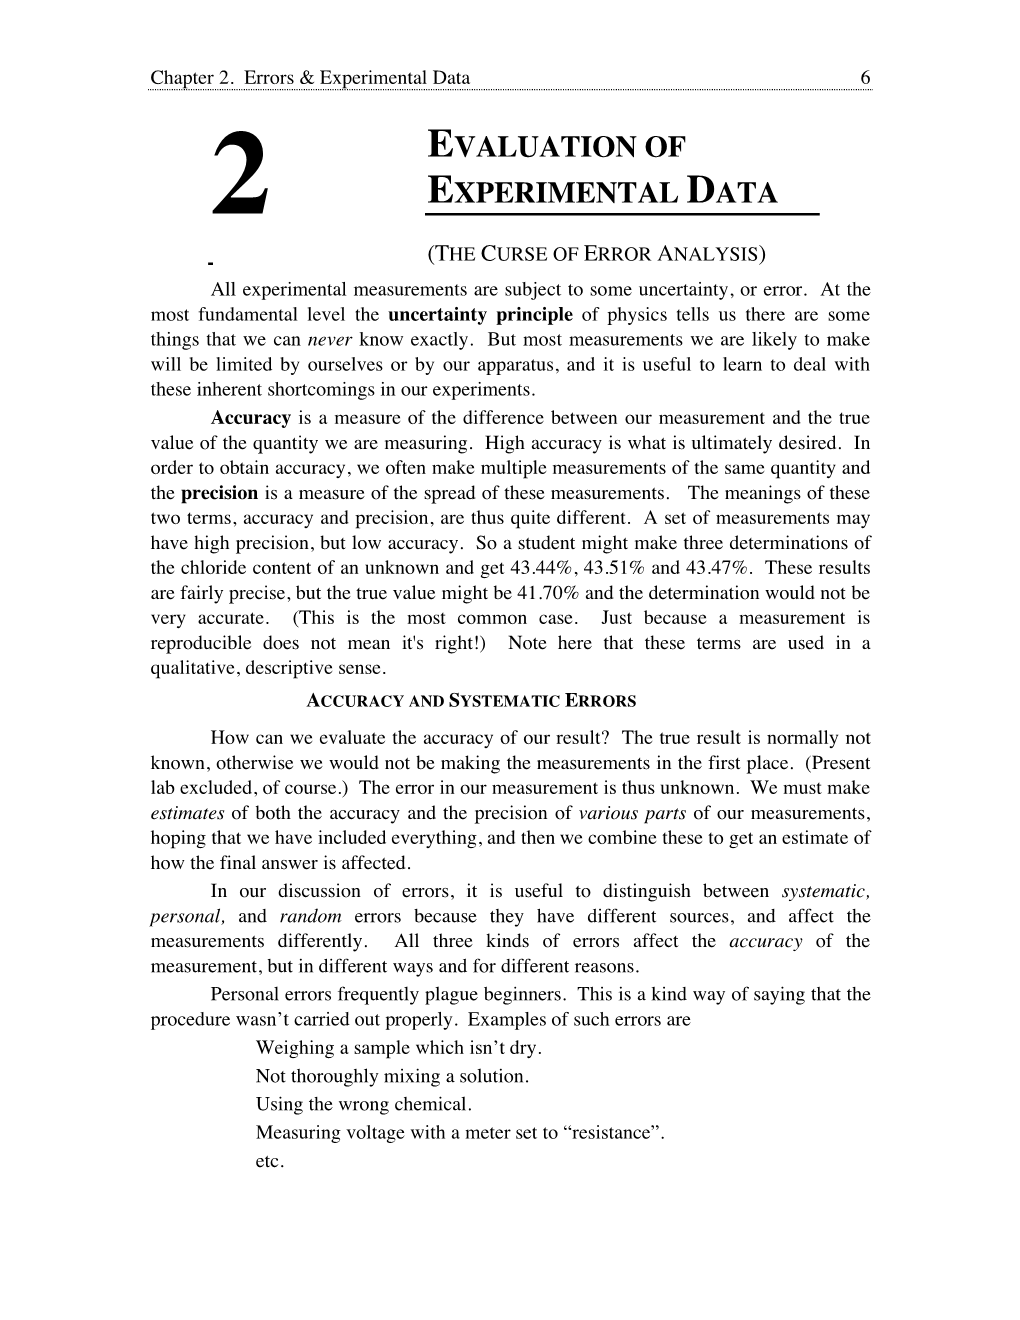 EVALUATION of EXPERIMENTAL DATA 2 (THE CURSE of ERROR ANALYSIS) All Experimental Measurements Are Subject to Some Uncertainty, Or Error